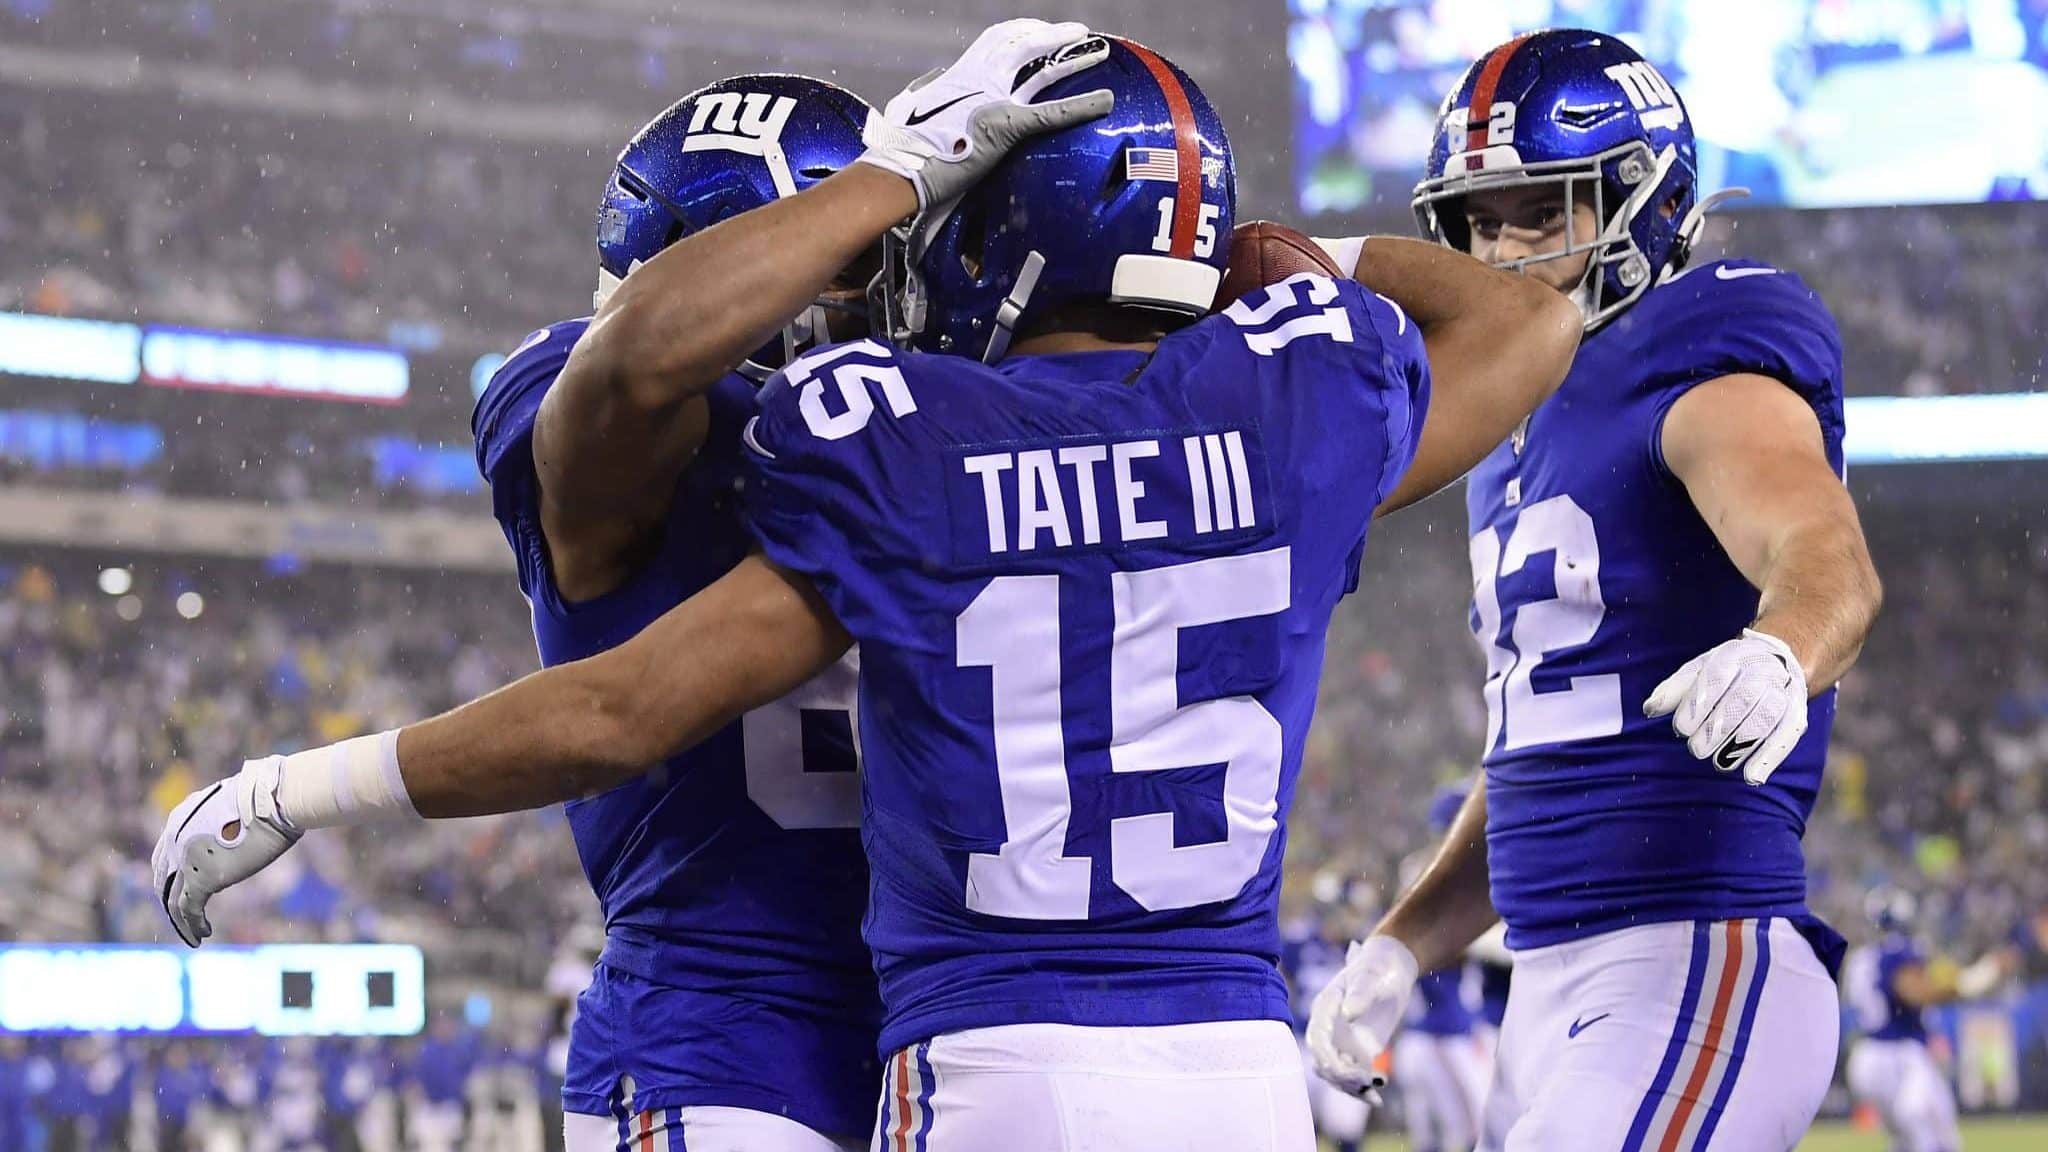 EAST RUTHERFORD, NEW JERSEY - DECEMBER 29: Golden Tate #15 of the New York Giants celebrates with his teammates after scoring a touchdown against the Philadelphia Eagles during the third quarter in the game at MetLife Stadium on December 29, 2019 in East Rutherford, New Jersey.